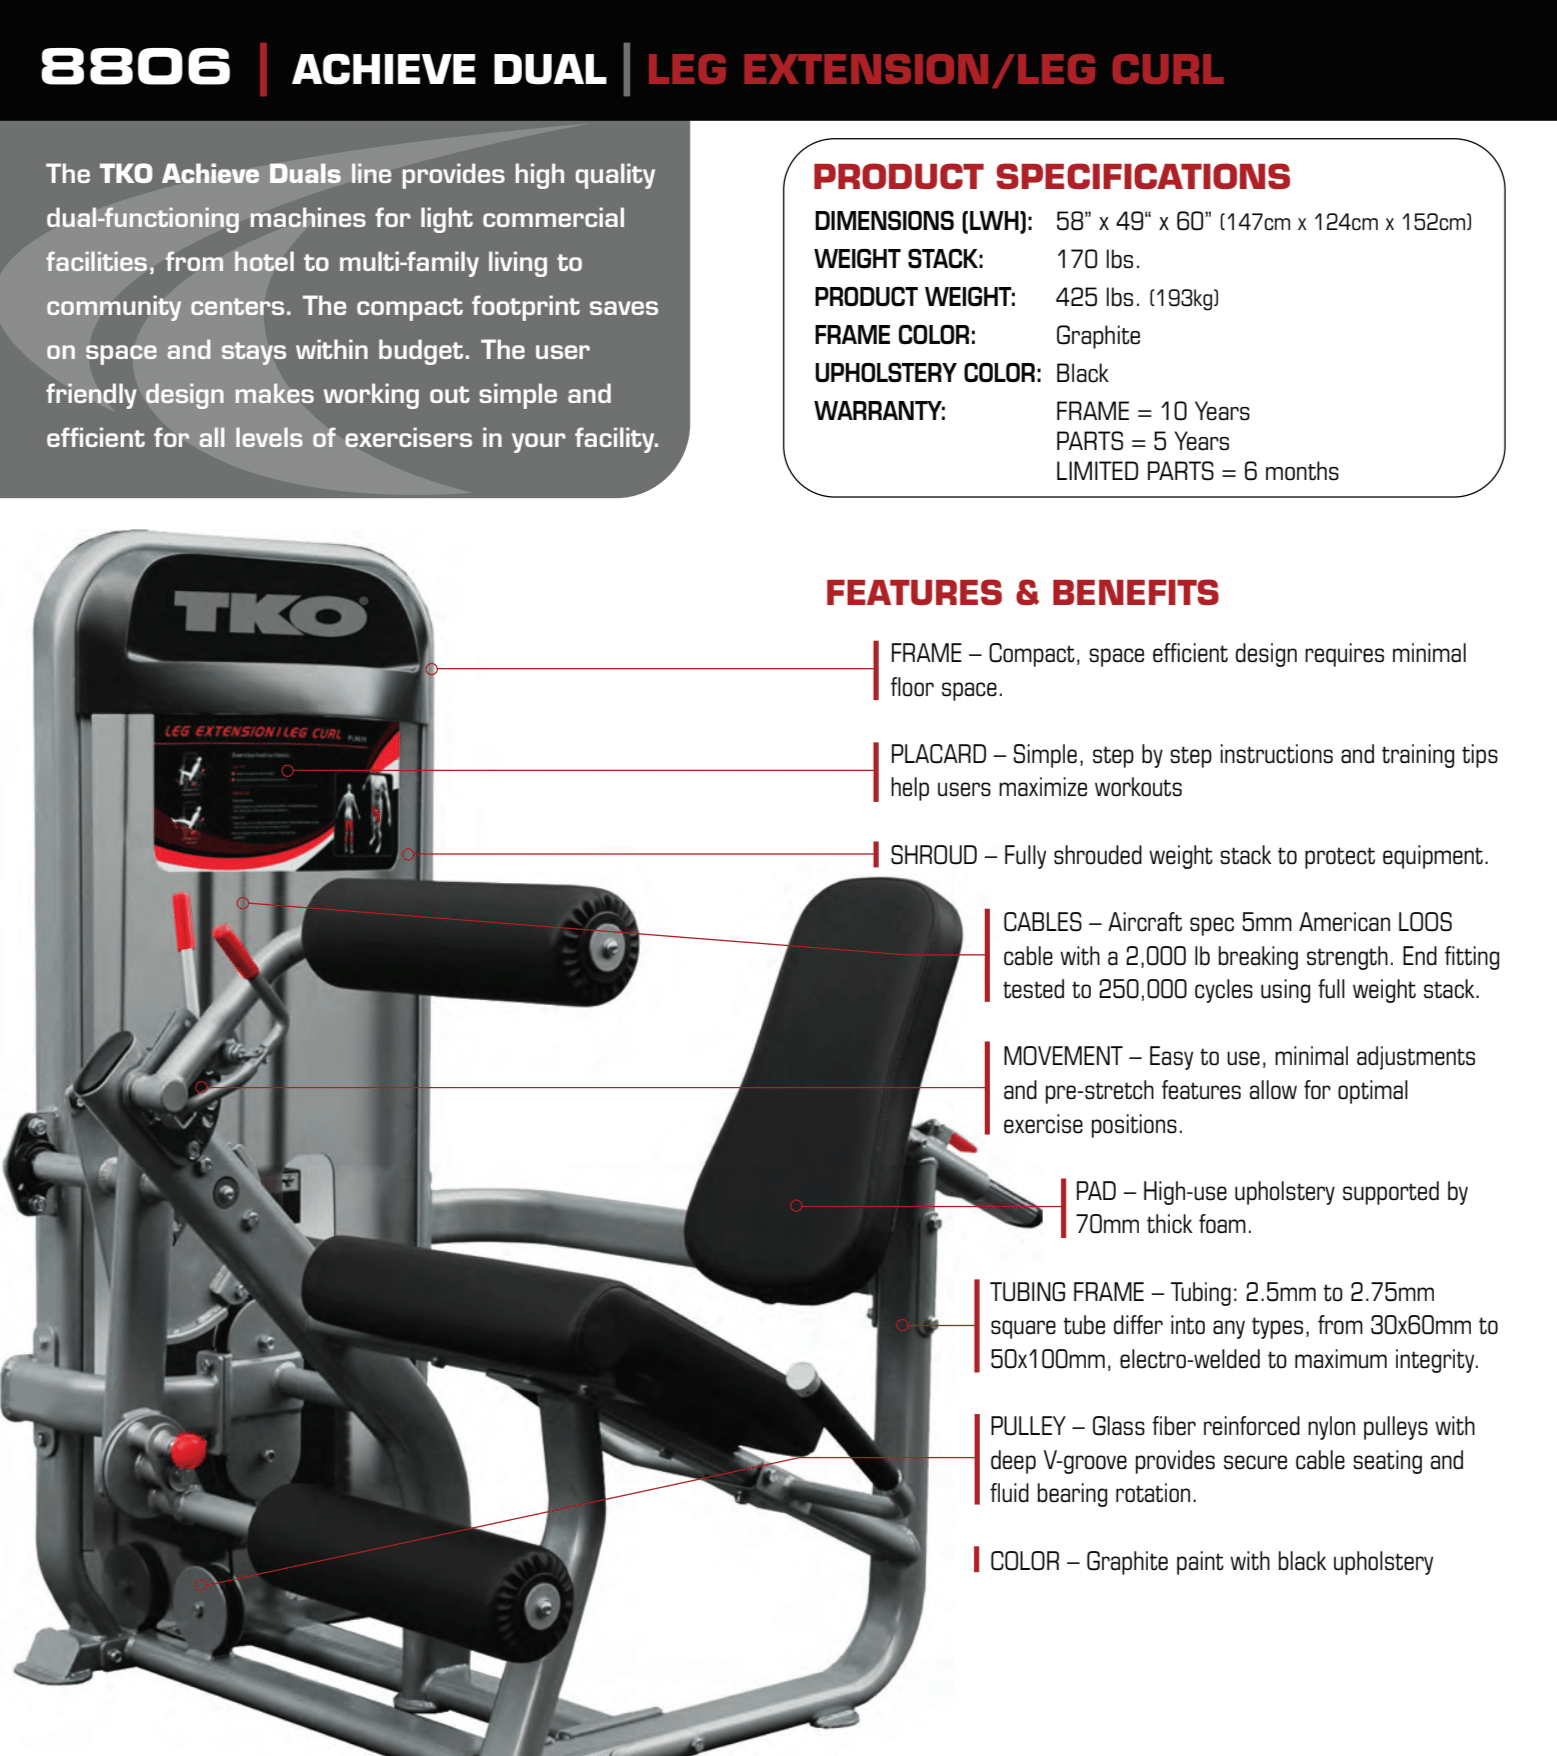 TKO Dual Leg Extension and Curl Machine Leg Extension / Curl TKO Strength and Performance   